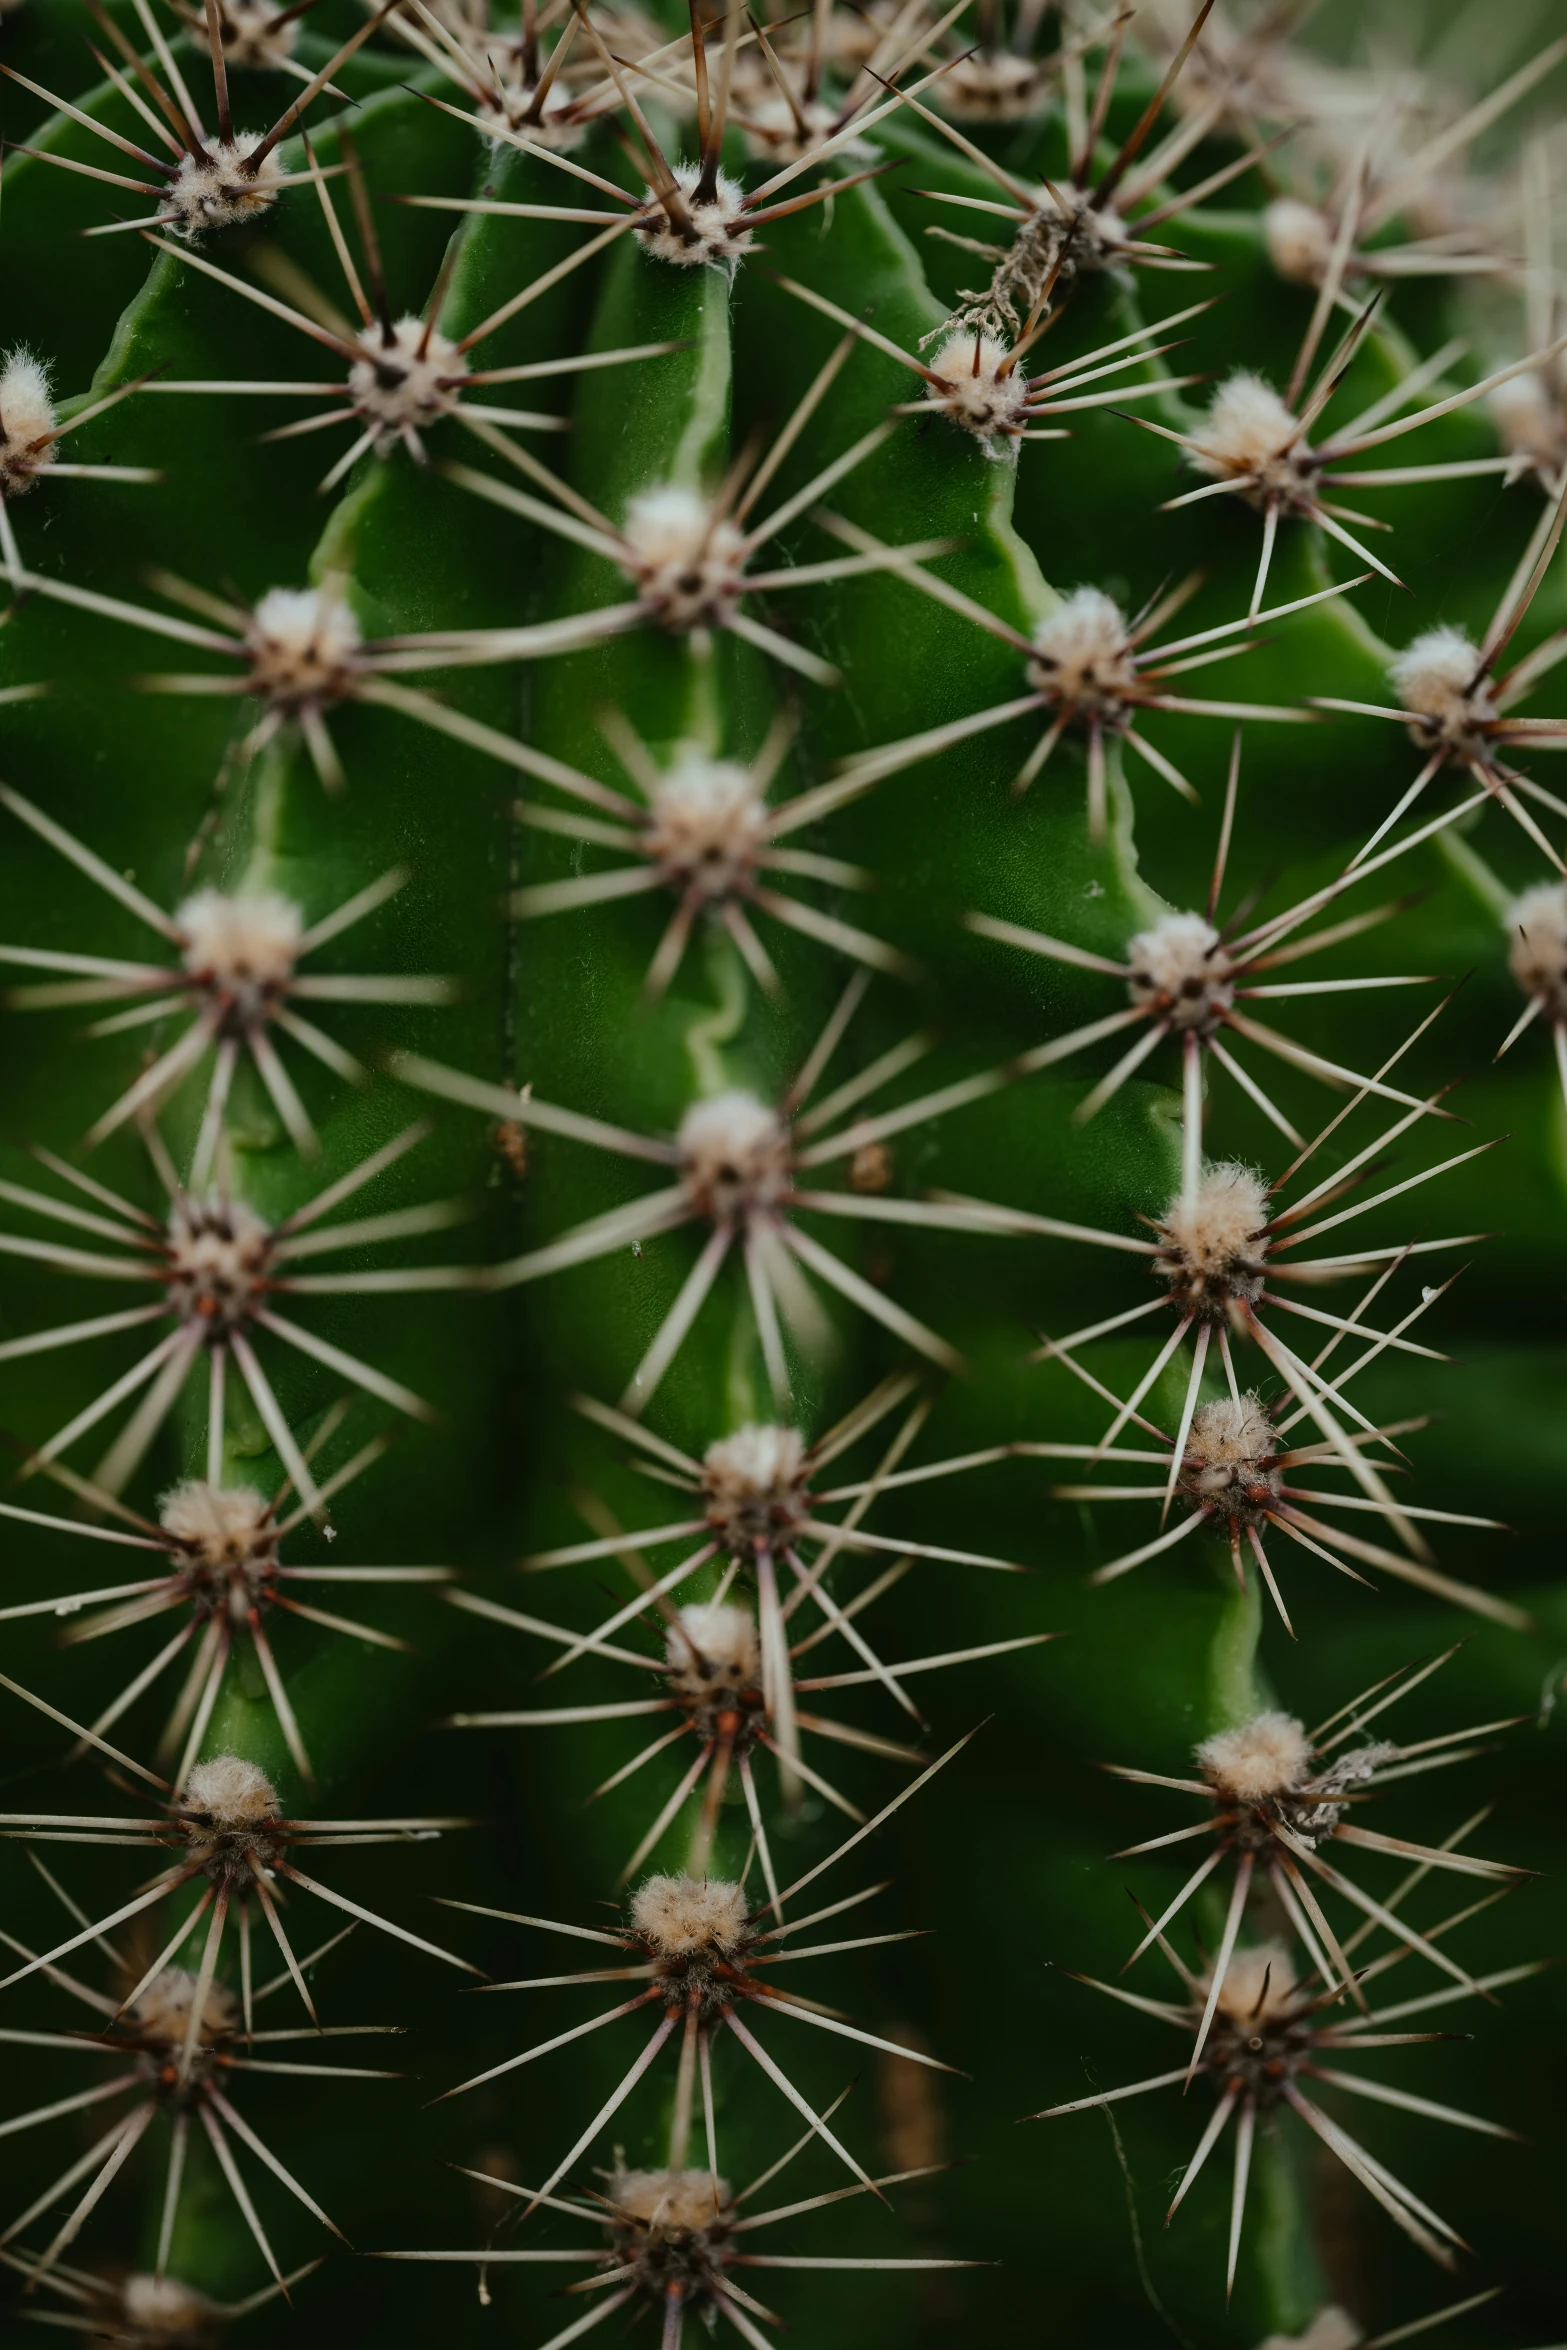 the back of a cactus's trunk, showing all the thin needles